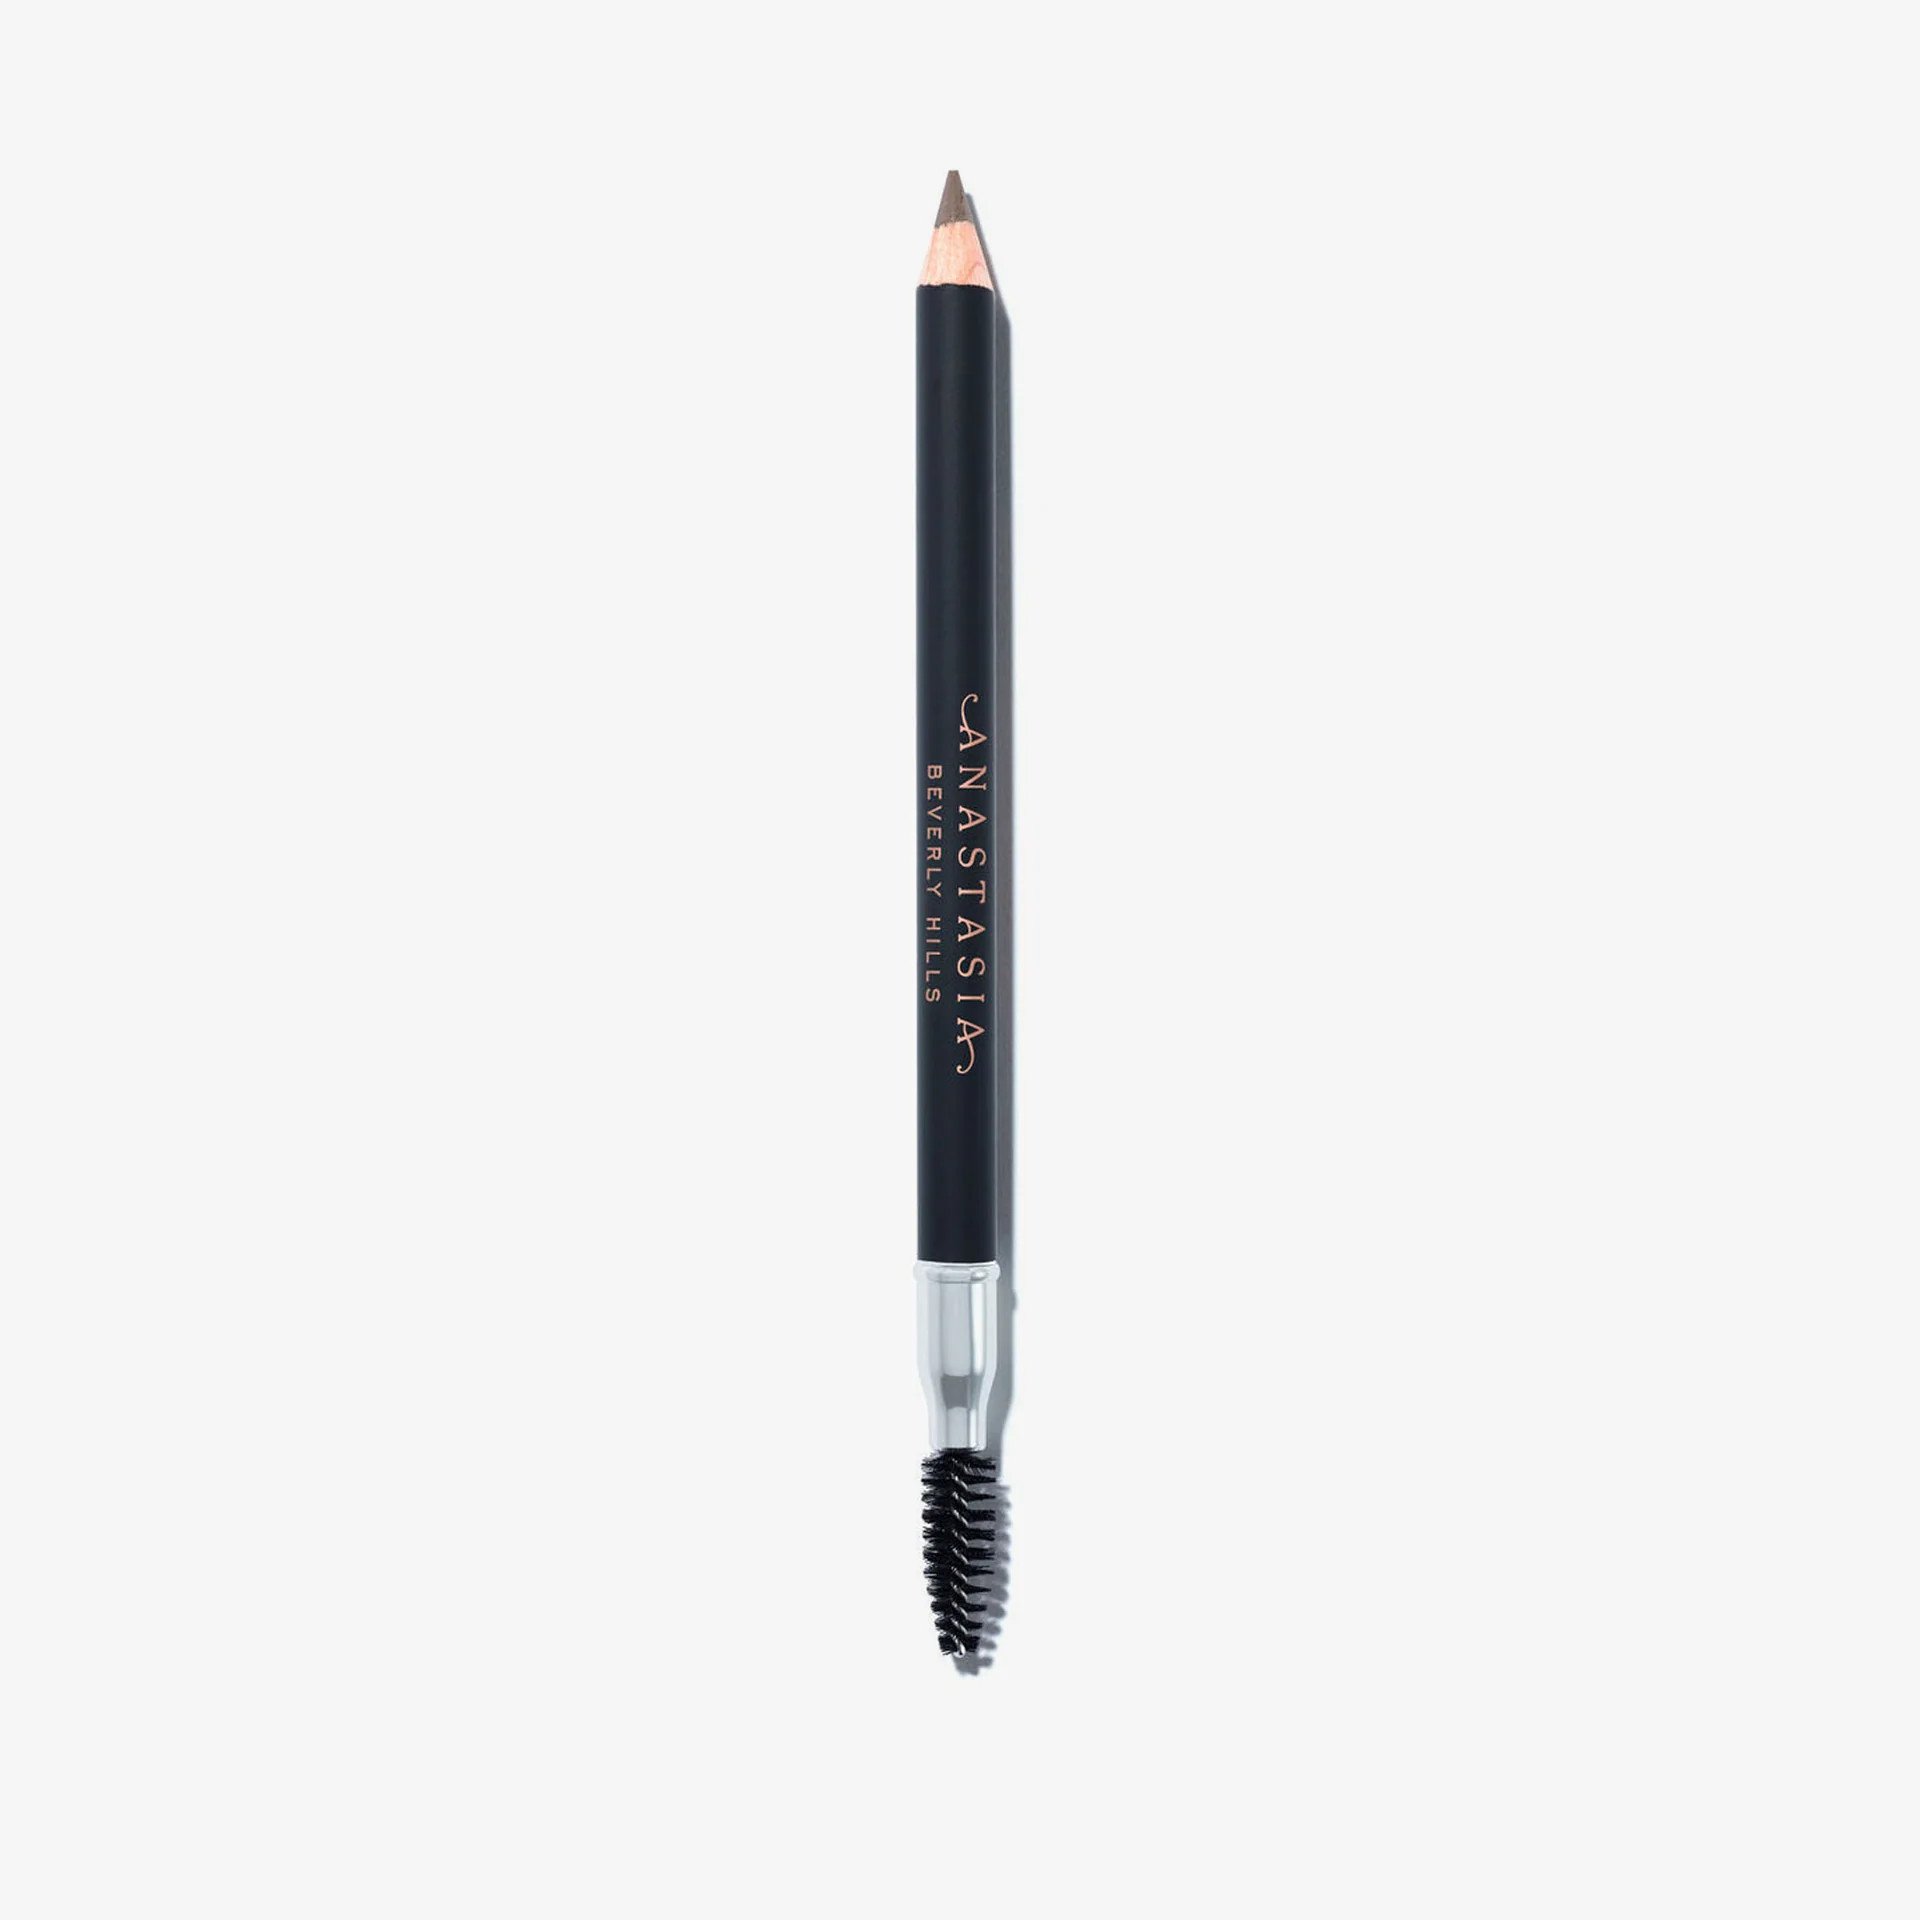 Perfect Brow Pencil | Anastasia Beverly Hills | Anastasia Beverly Hills